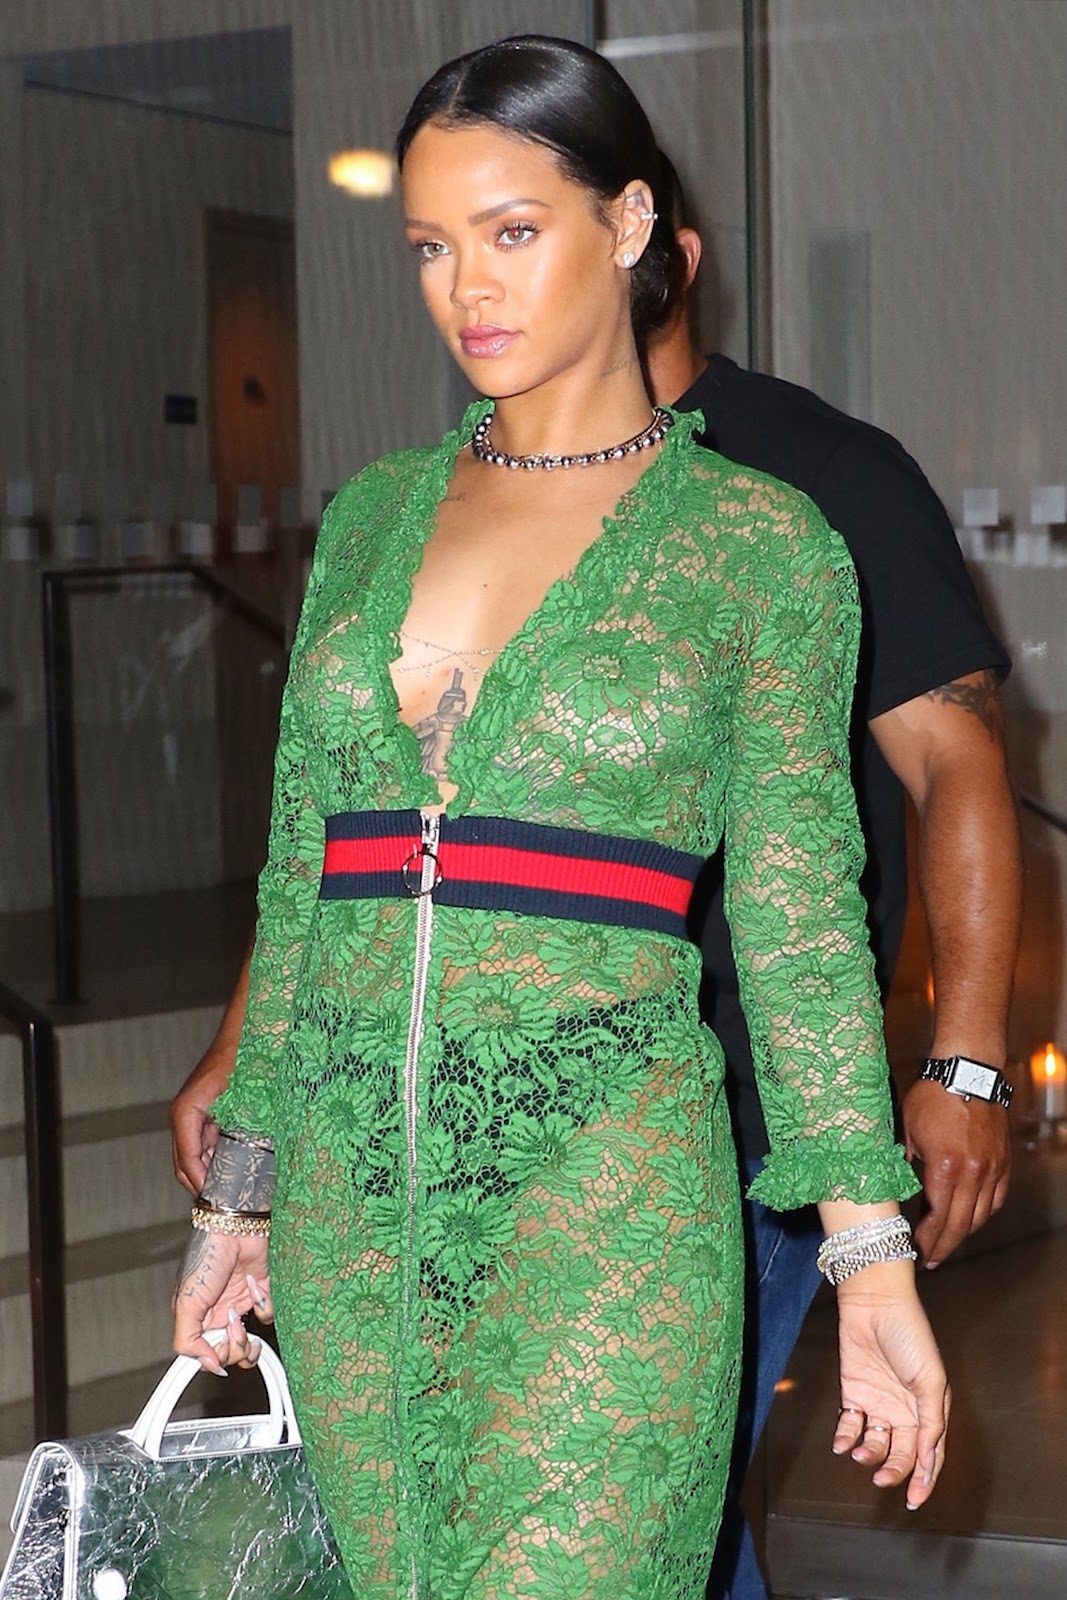 Rihanna Goes Braless, Exposes Nipples in Completely See-Through Dress